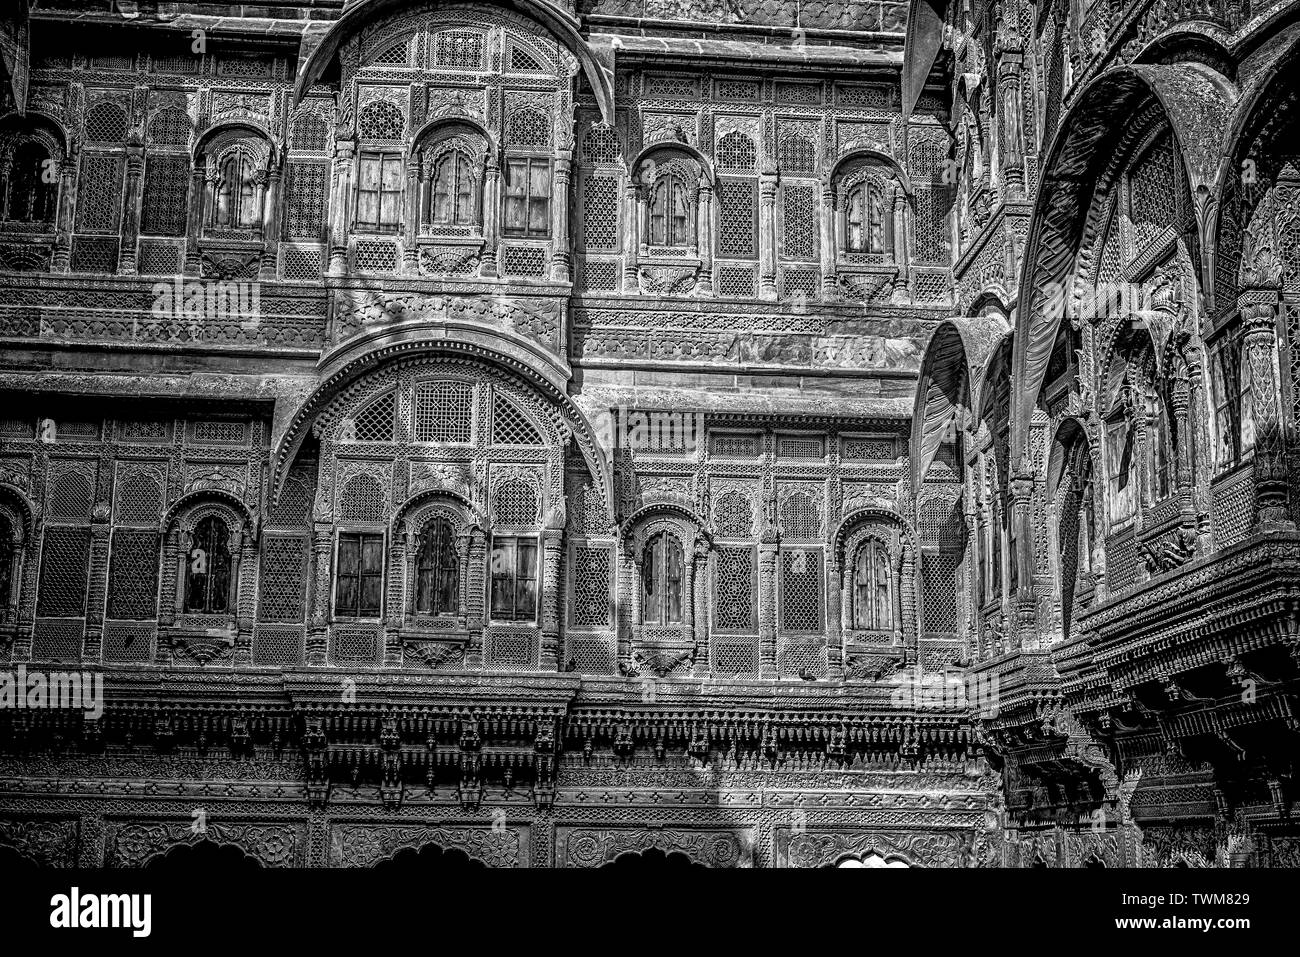 A close-up of Jharokha or window of Mehrangarh Fort of Jodhpur,a heritage art work of Rajasthan expressed in Black&White impression. Stock Photo